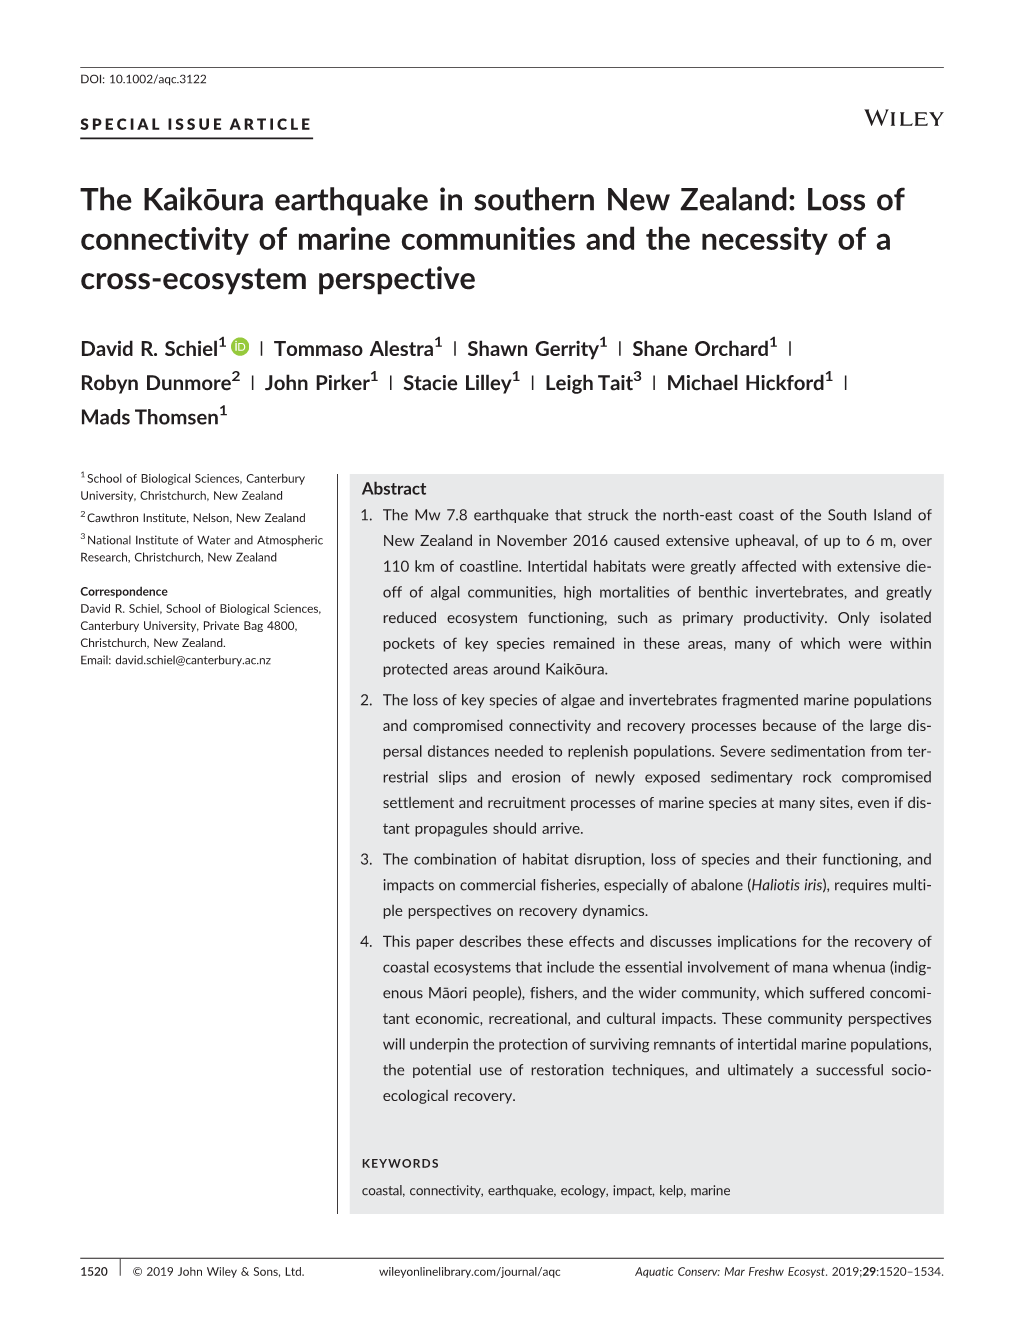 The Kaikōura Earthquake in Southern New Zealand: Loss of Connectivity of Marine Communities and the Necessity of a Cross‐Ecosystem Perspective